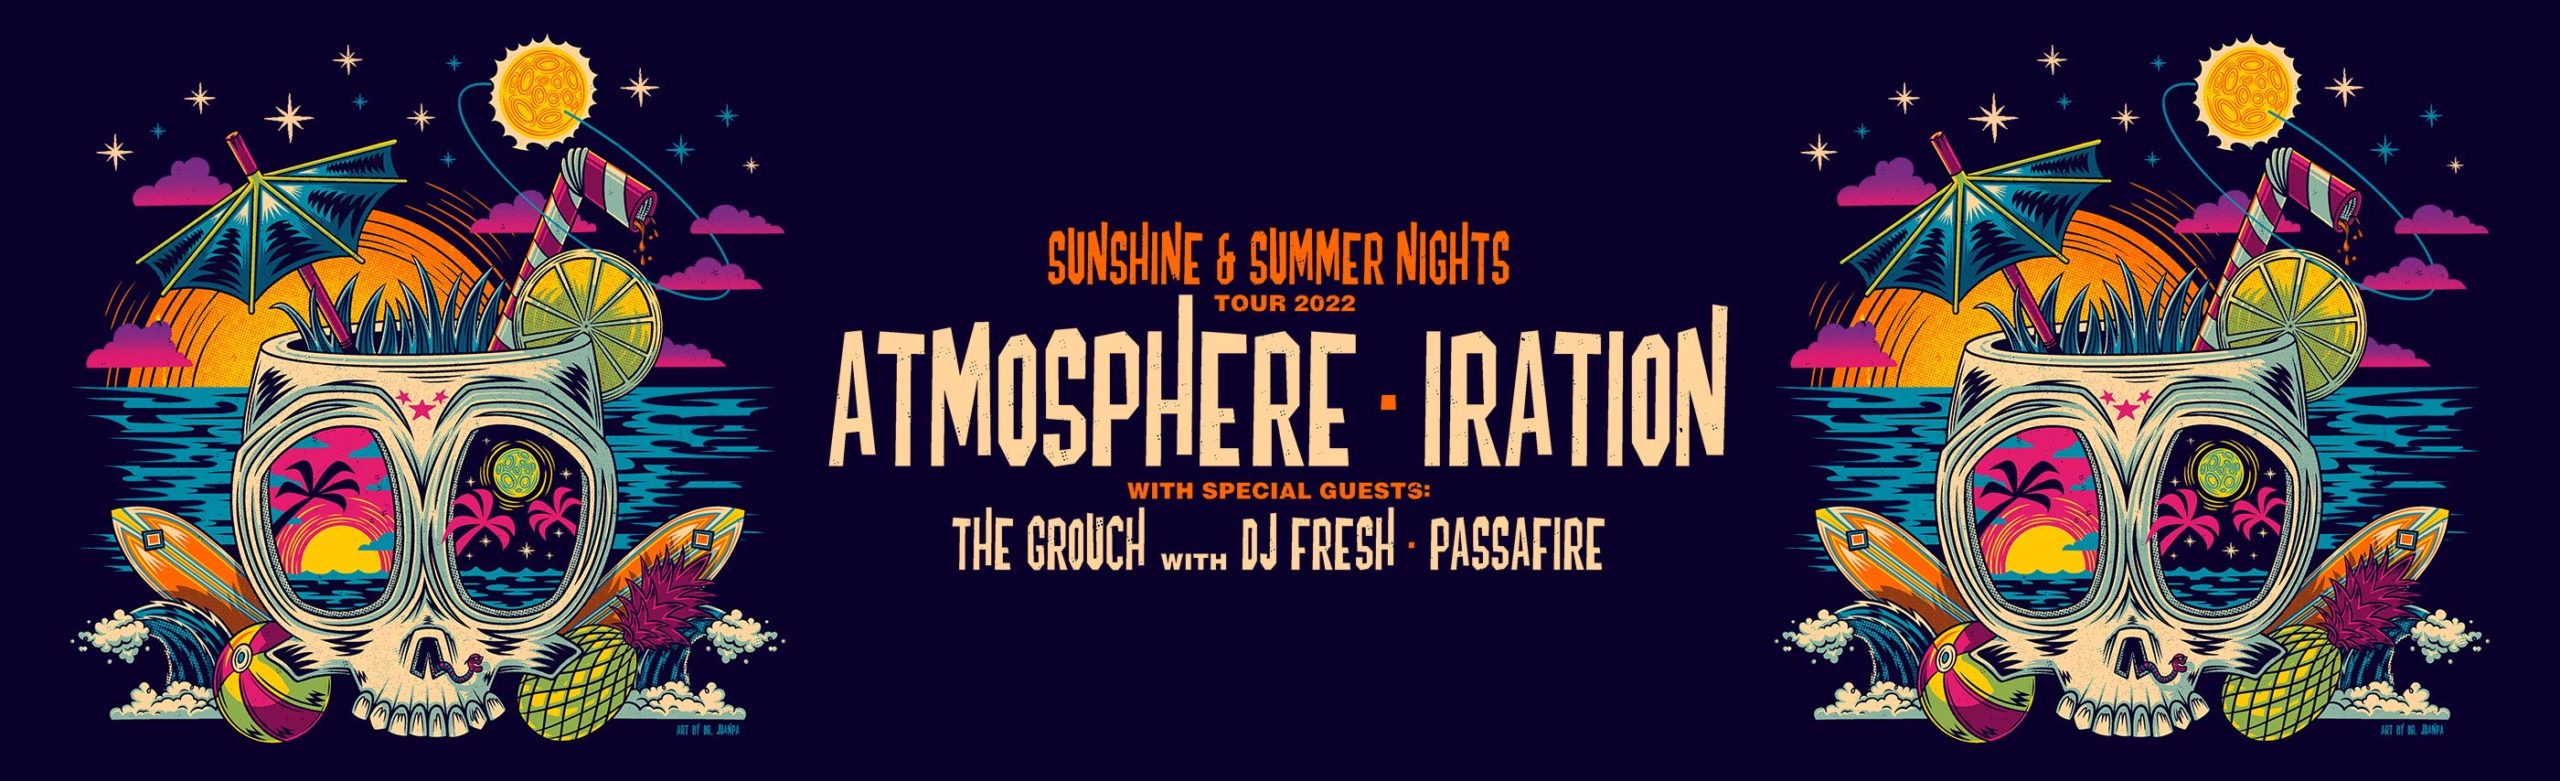 Atmosphere and Iration Announce Concert at KettleHouse Amphitheater with Grouch, DJ Fresh and Passafire Image